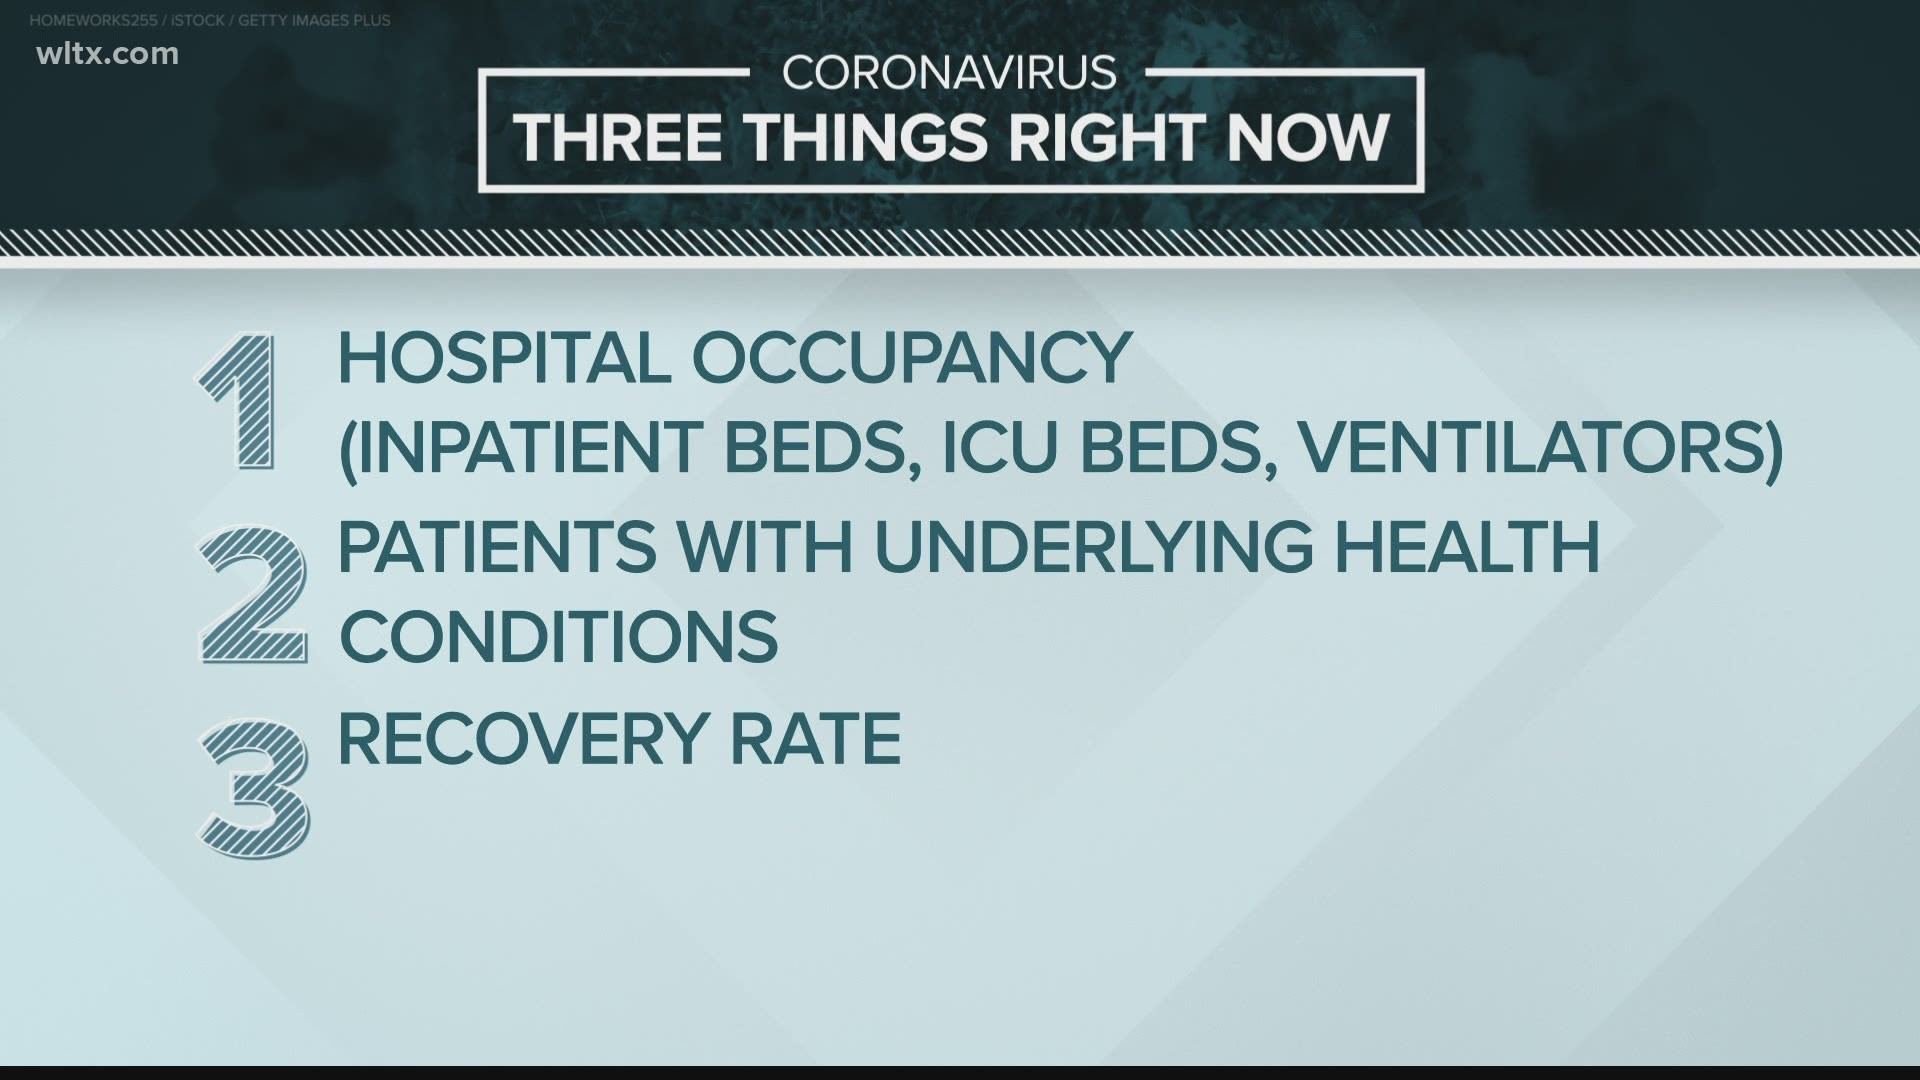 Here are 3 things you need to know about COVID-19 in the Palmetto State this week - hospital occupancy, patients with underlying health conditions and recovery rate.